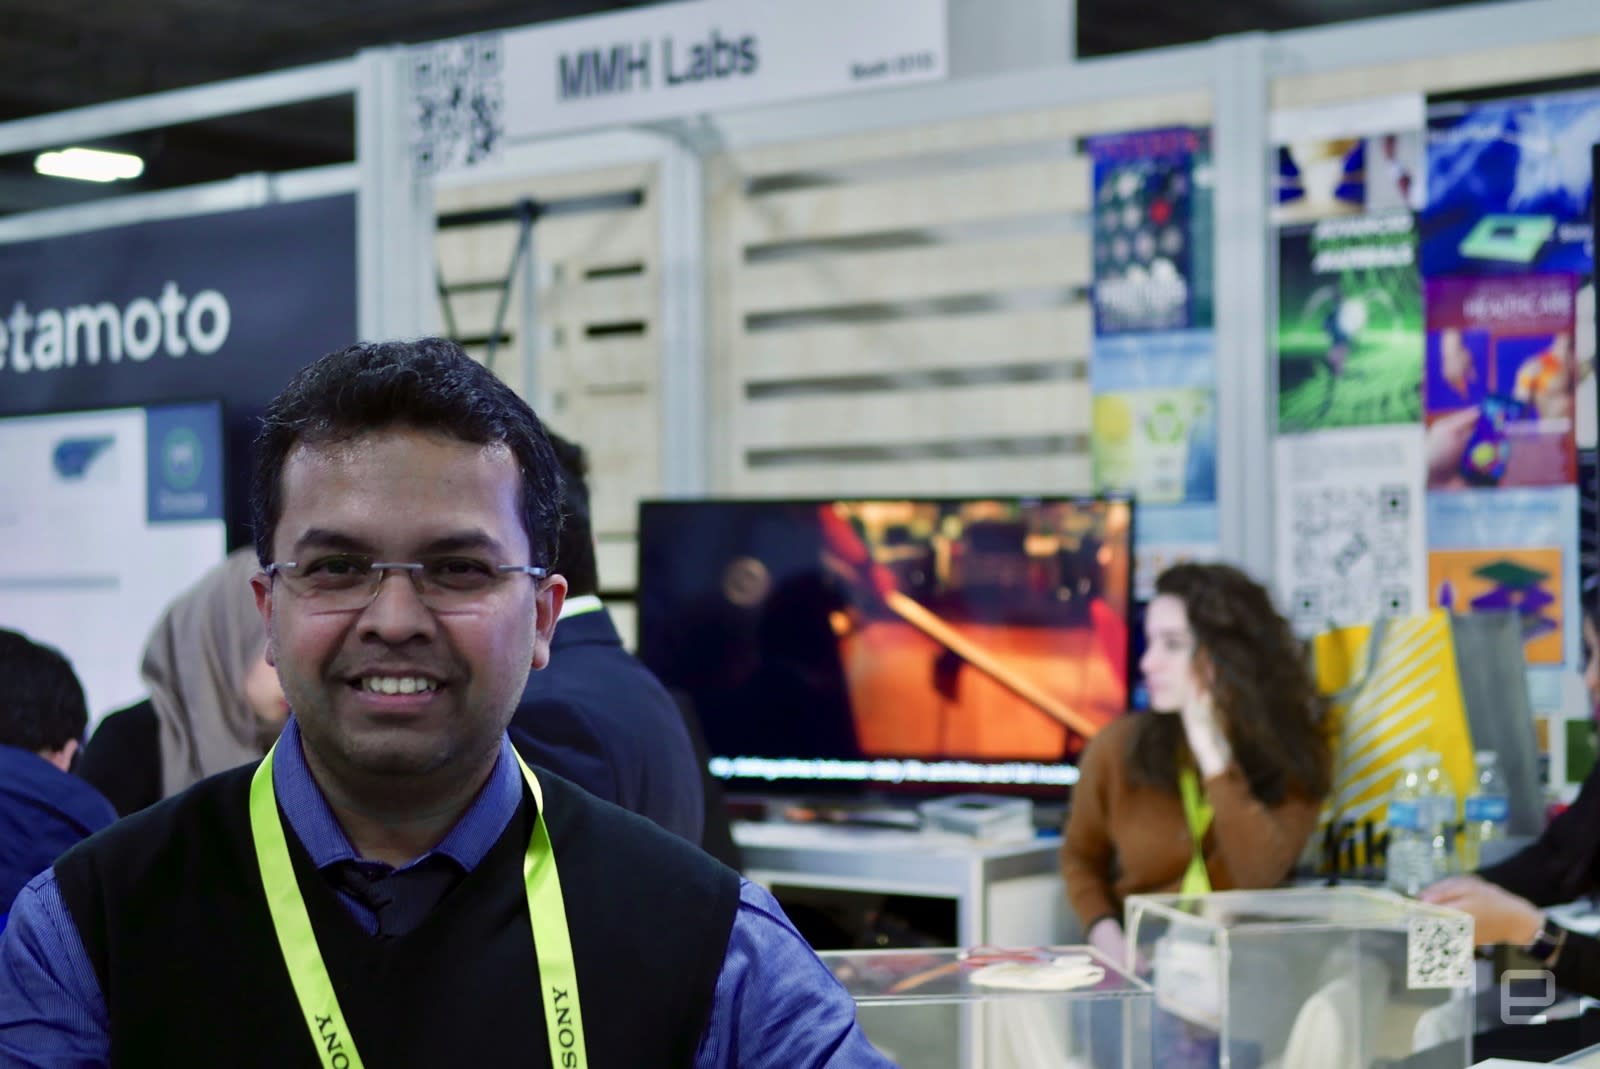 Muhammad Hussain of MMH Labs at CES